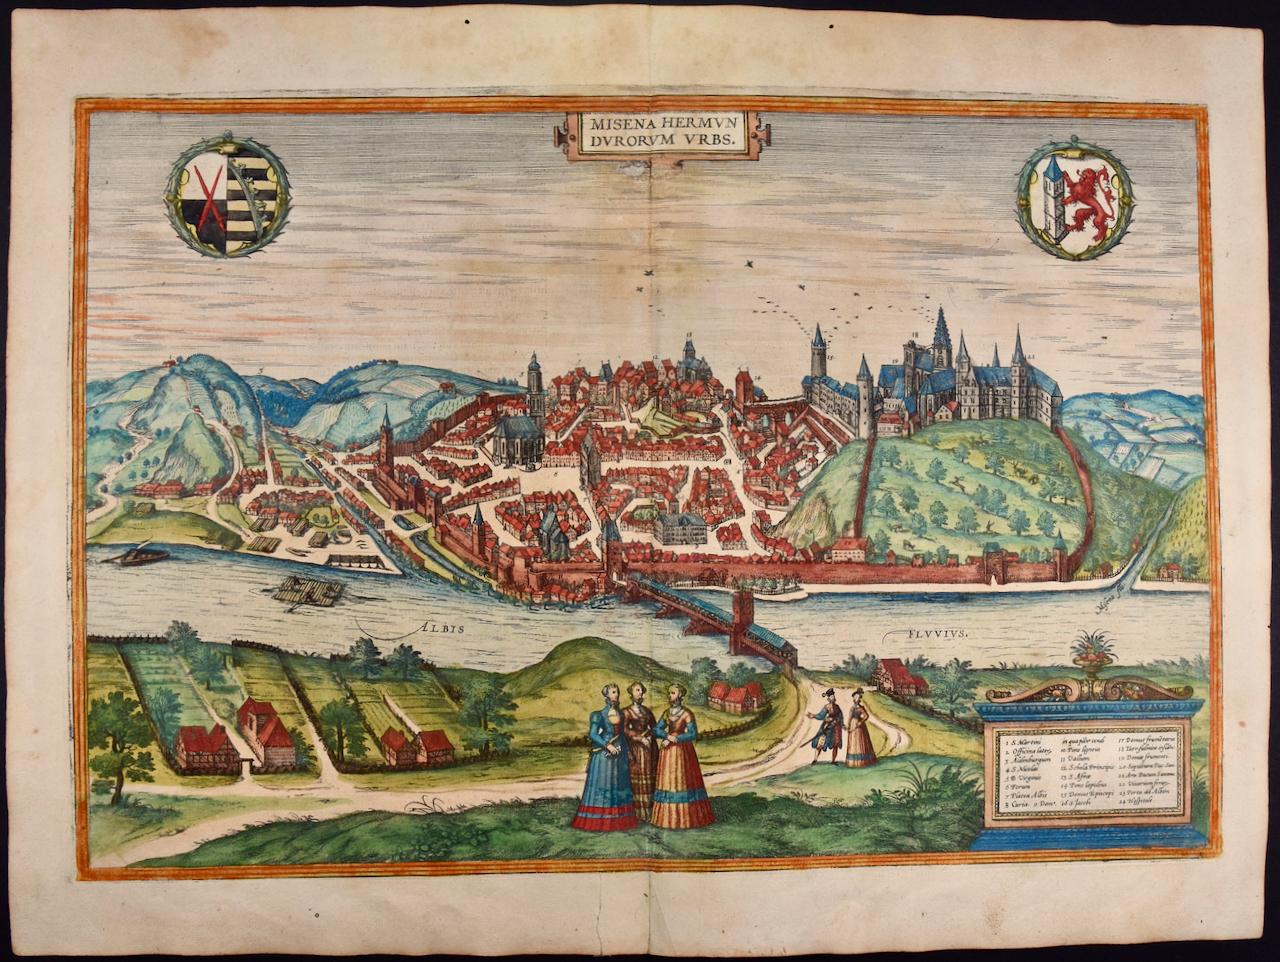  View of Meissen, Germany: A 16th Century Hand-colored Map by Braun & Hogenberg